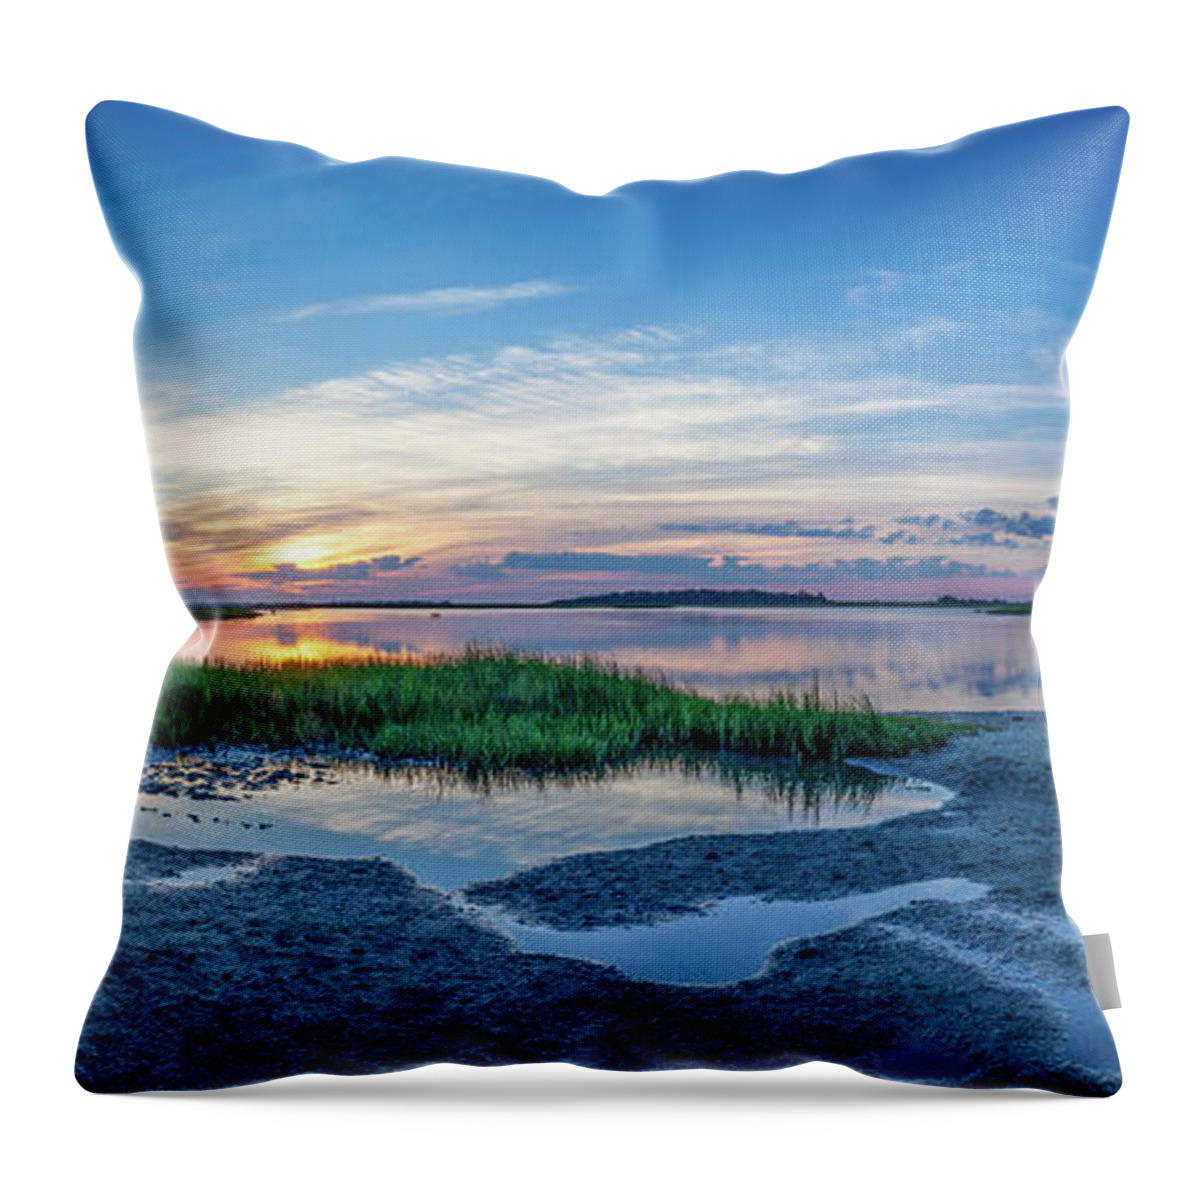 Oak River Pano Throw Pillow featuring the photograph Oak River Pano by Lon Dittrick